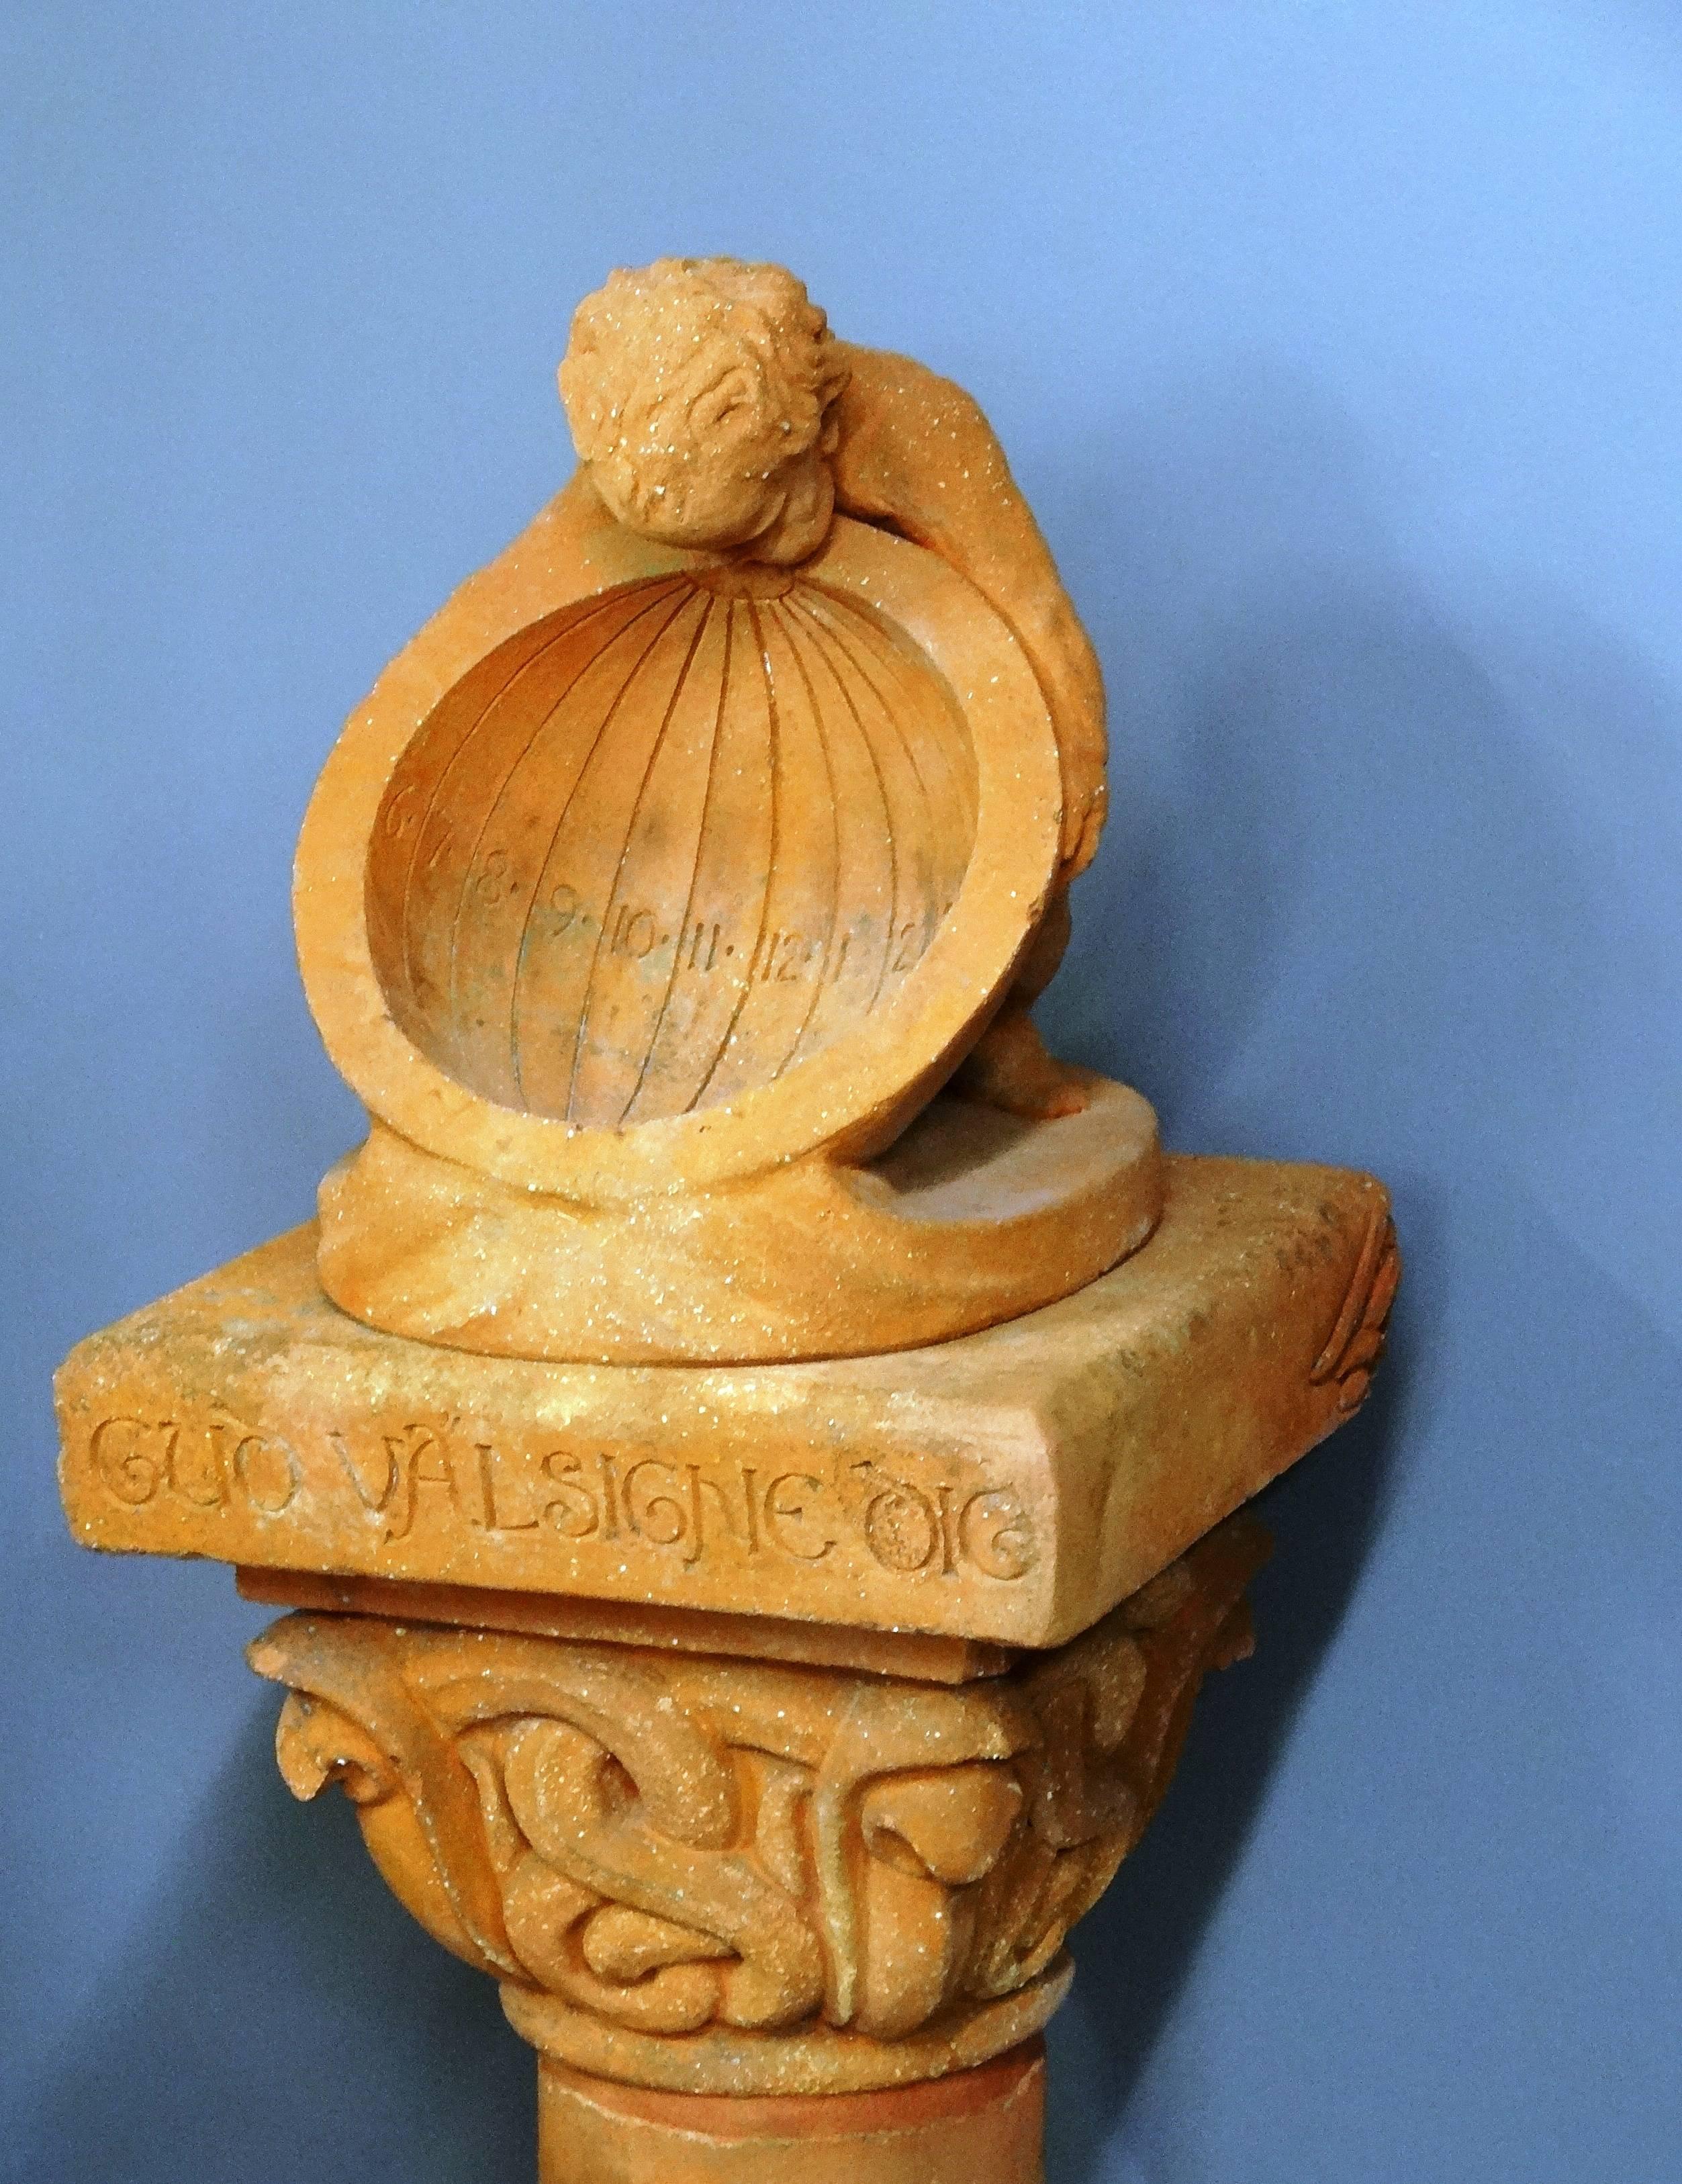 A rare terracotta Arts & Crafts Compton Potters Arts guild sundial; circa 1900, known as the “Cobra Sun Dial”; illustrated in their catalogues at the time; this version surmounted with the separate Compton cherub sundial. The cobra sun dial was